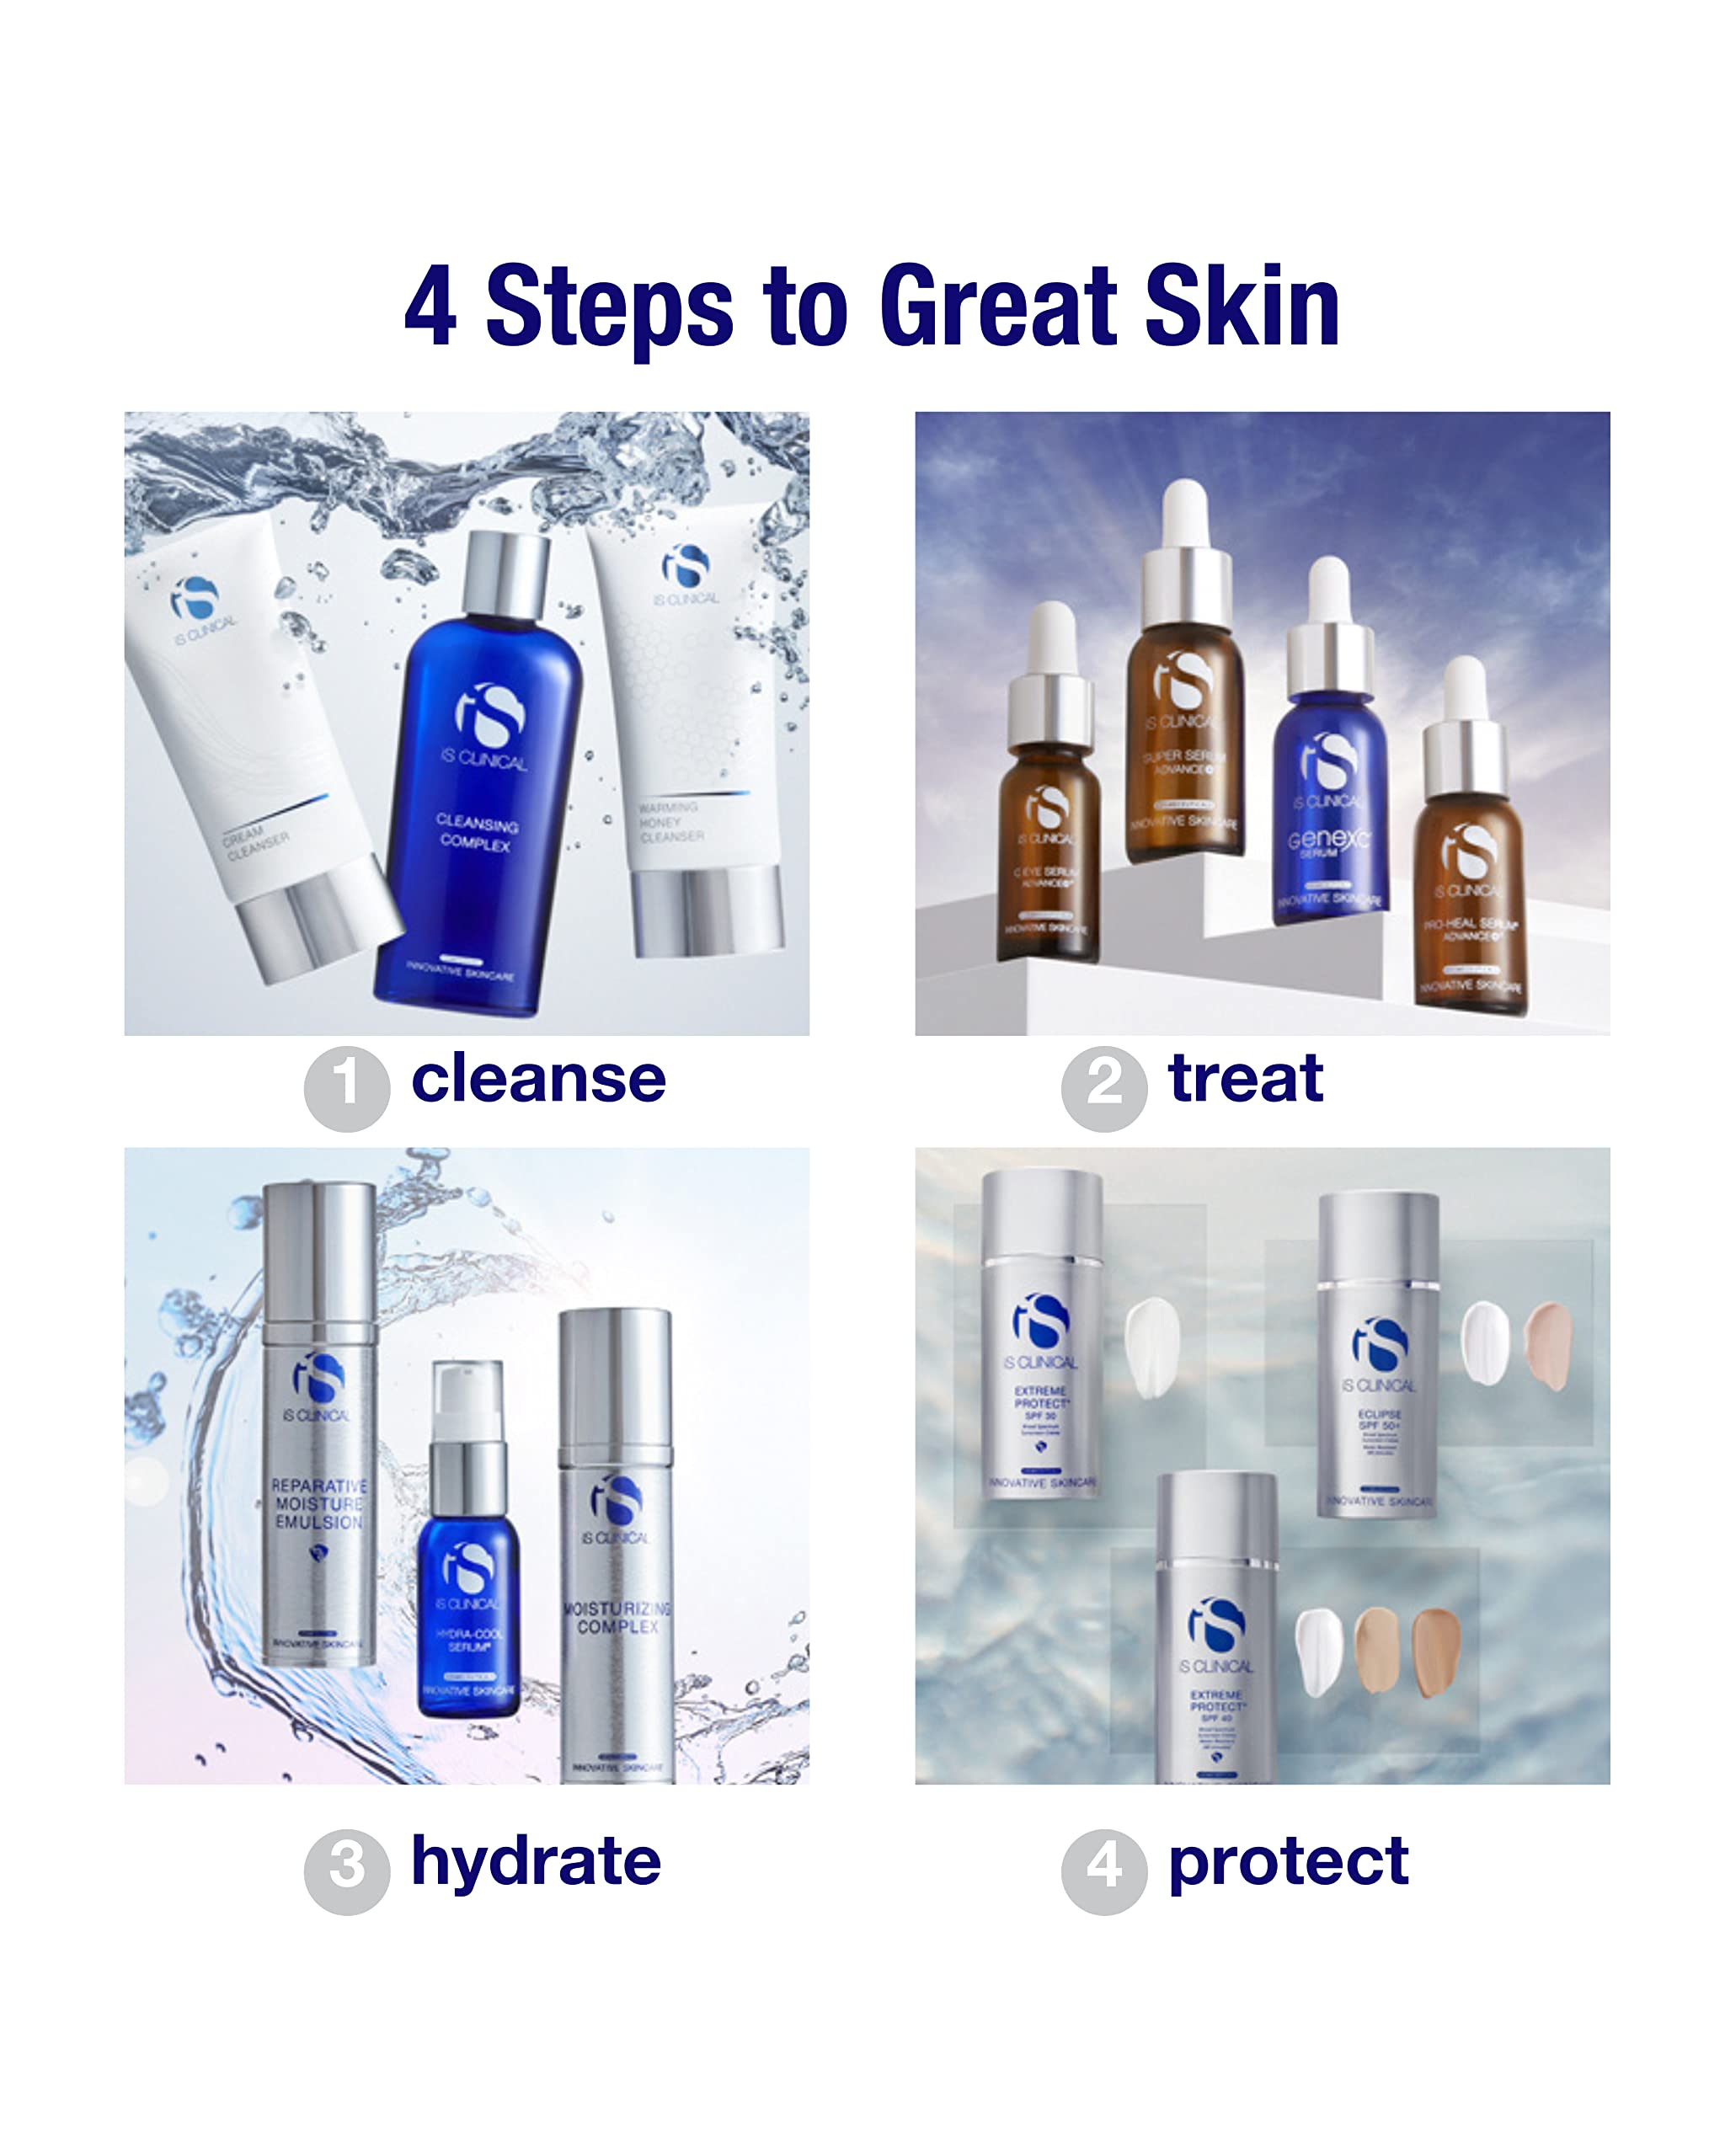 iS CLINICAL GENEXC SERUM, Vitamin C Serum, Antioxidant serum for face; Promotes cell regeneration, Youthful looking skin.